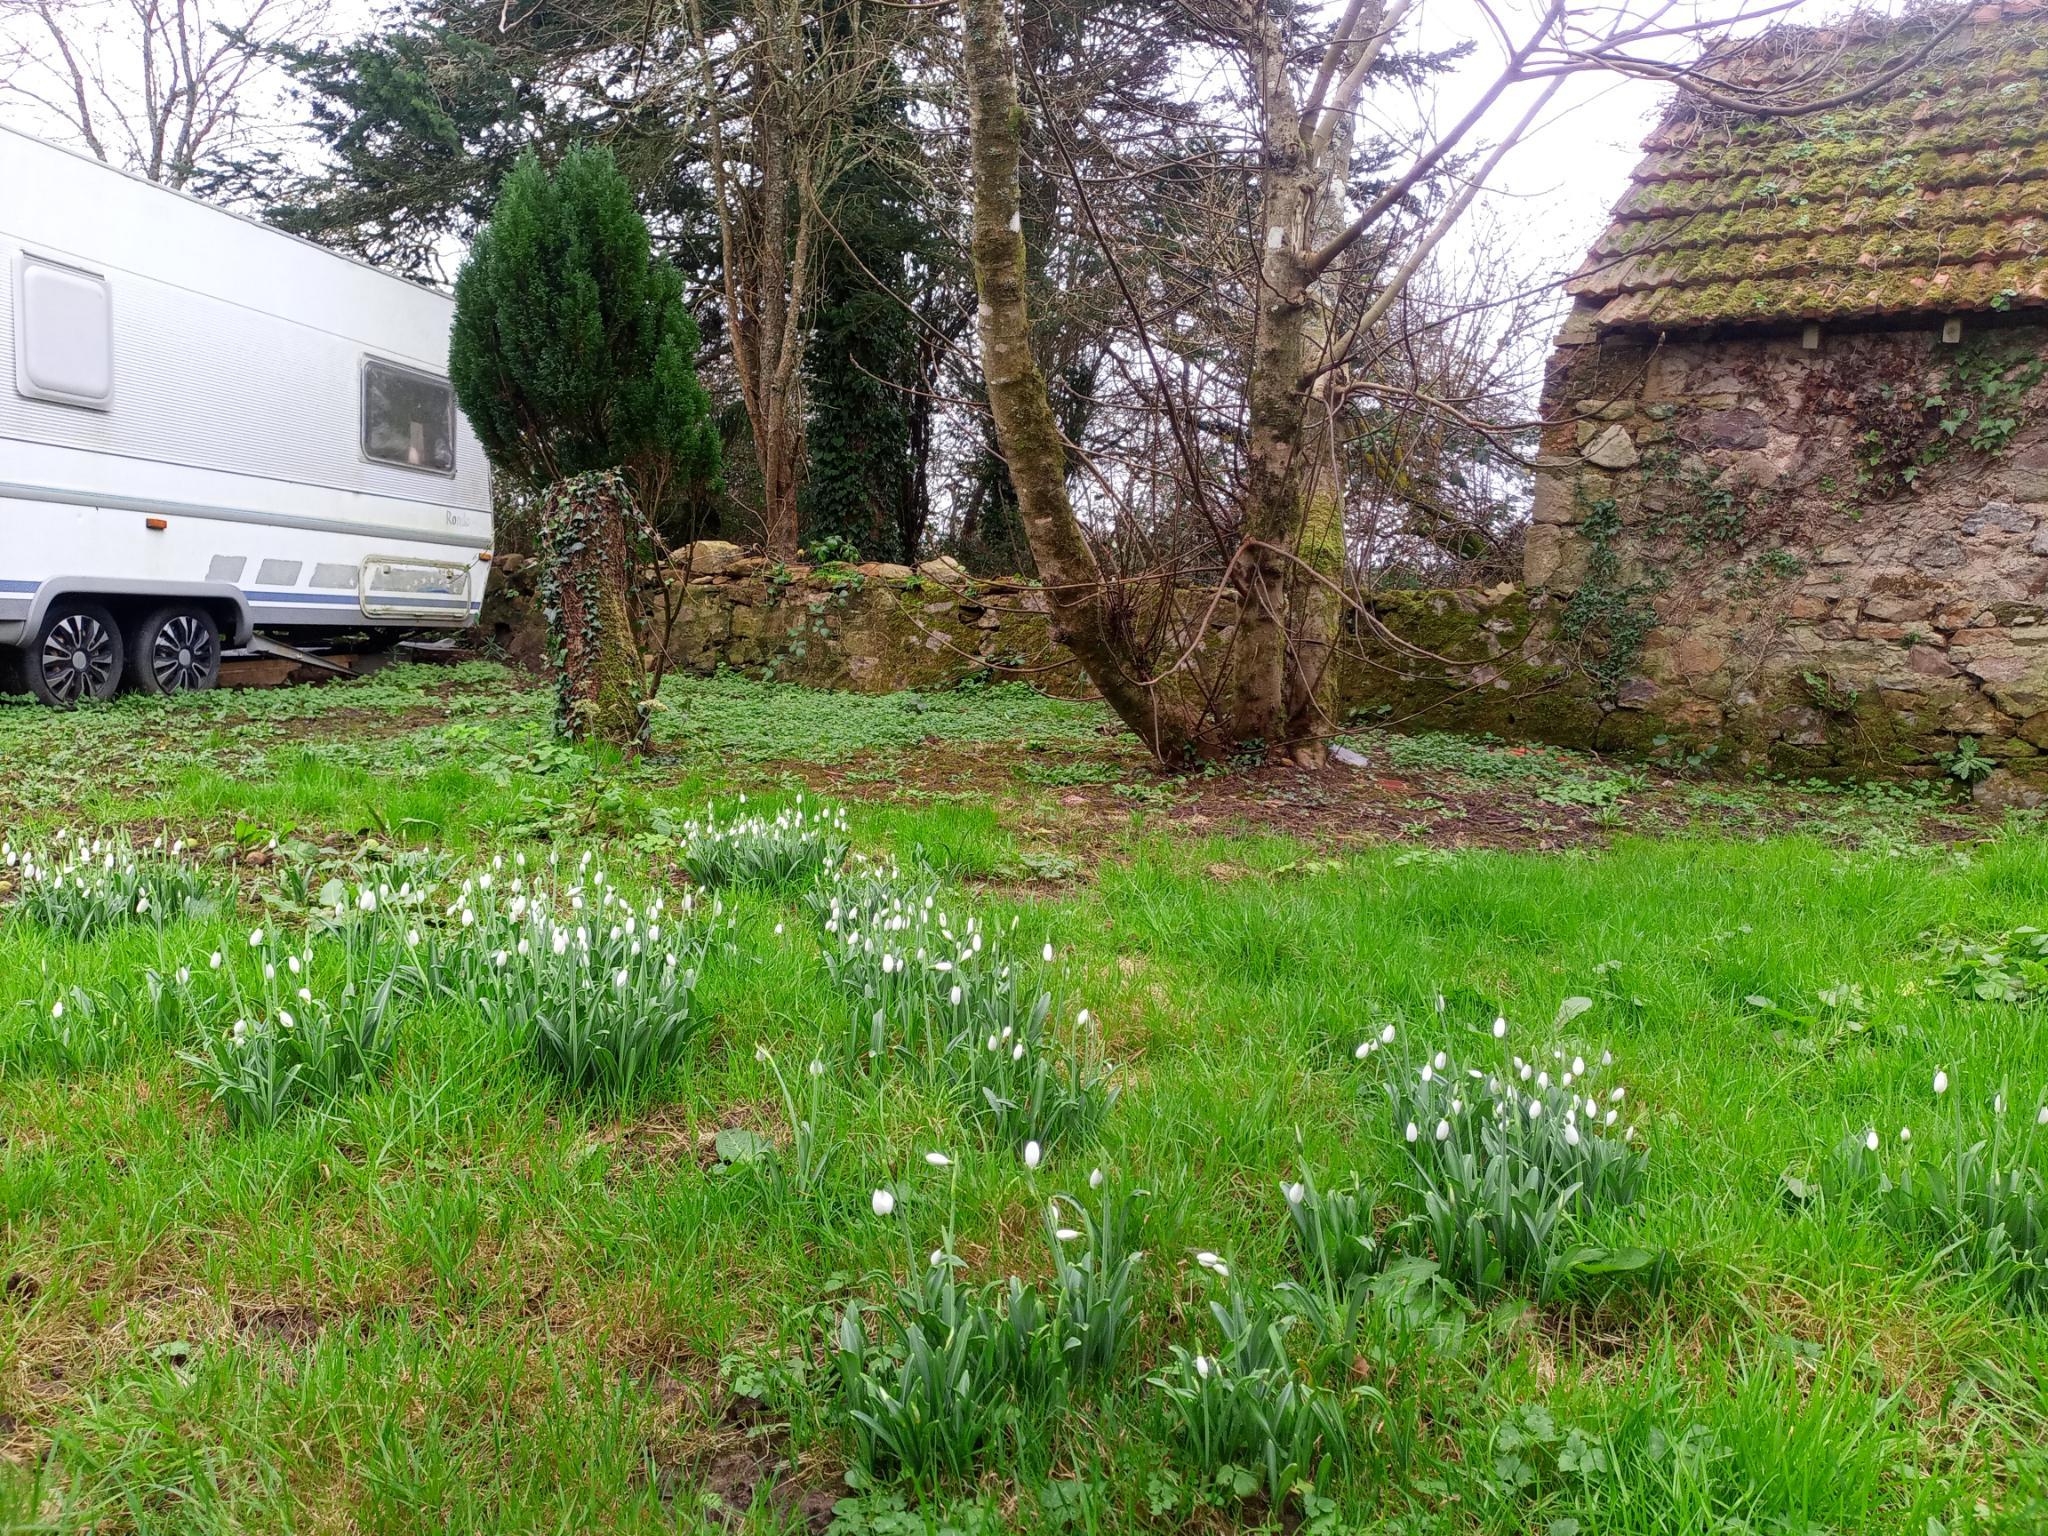 Spring comes early in Normandie!